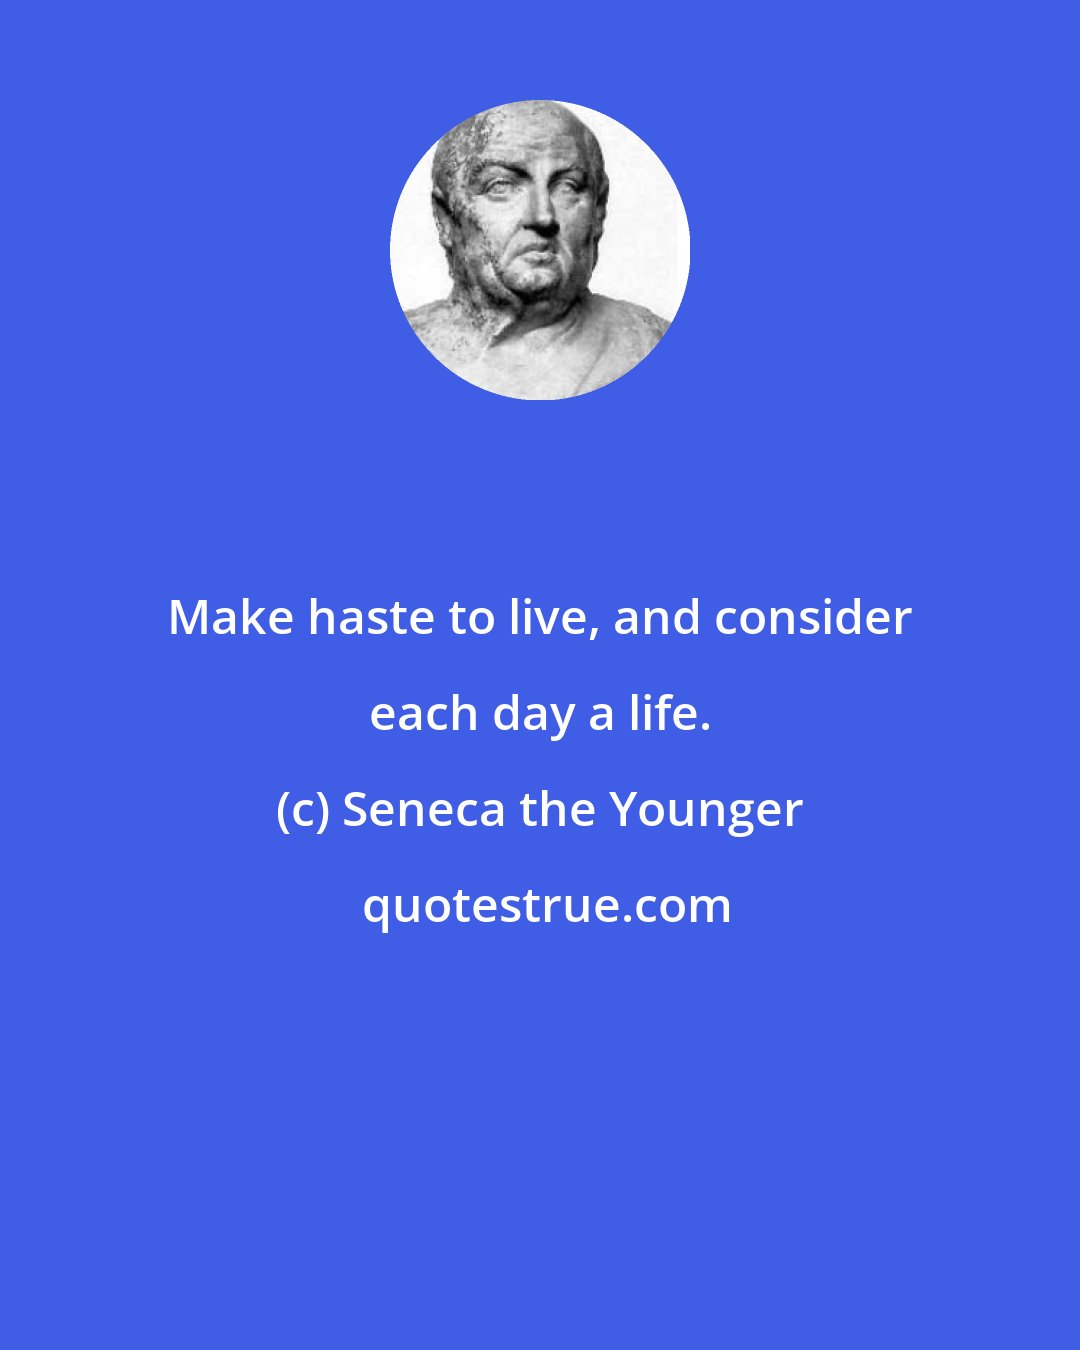 Seneca the Younger: Make haste to live, and consider each day a life.